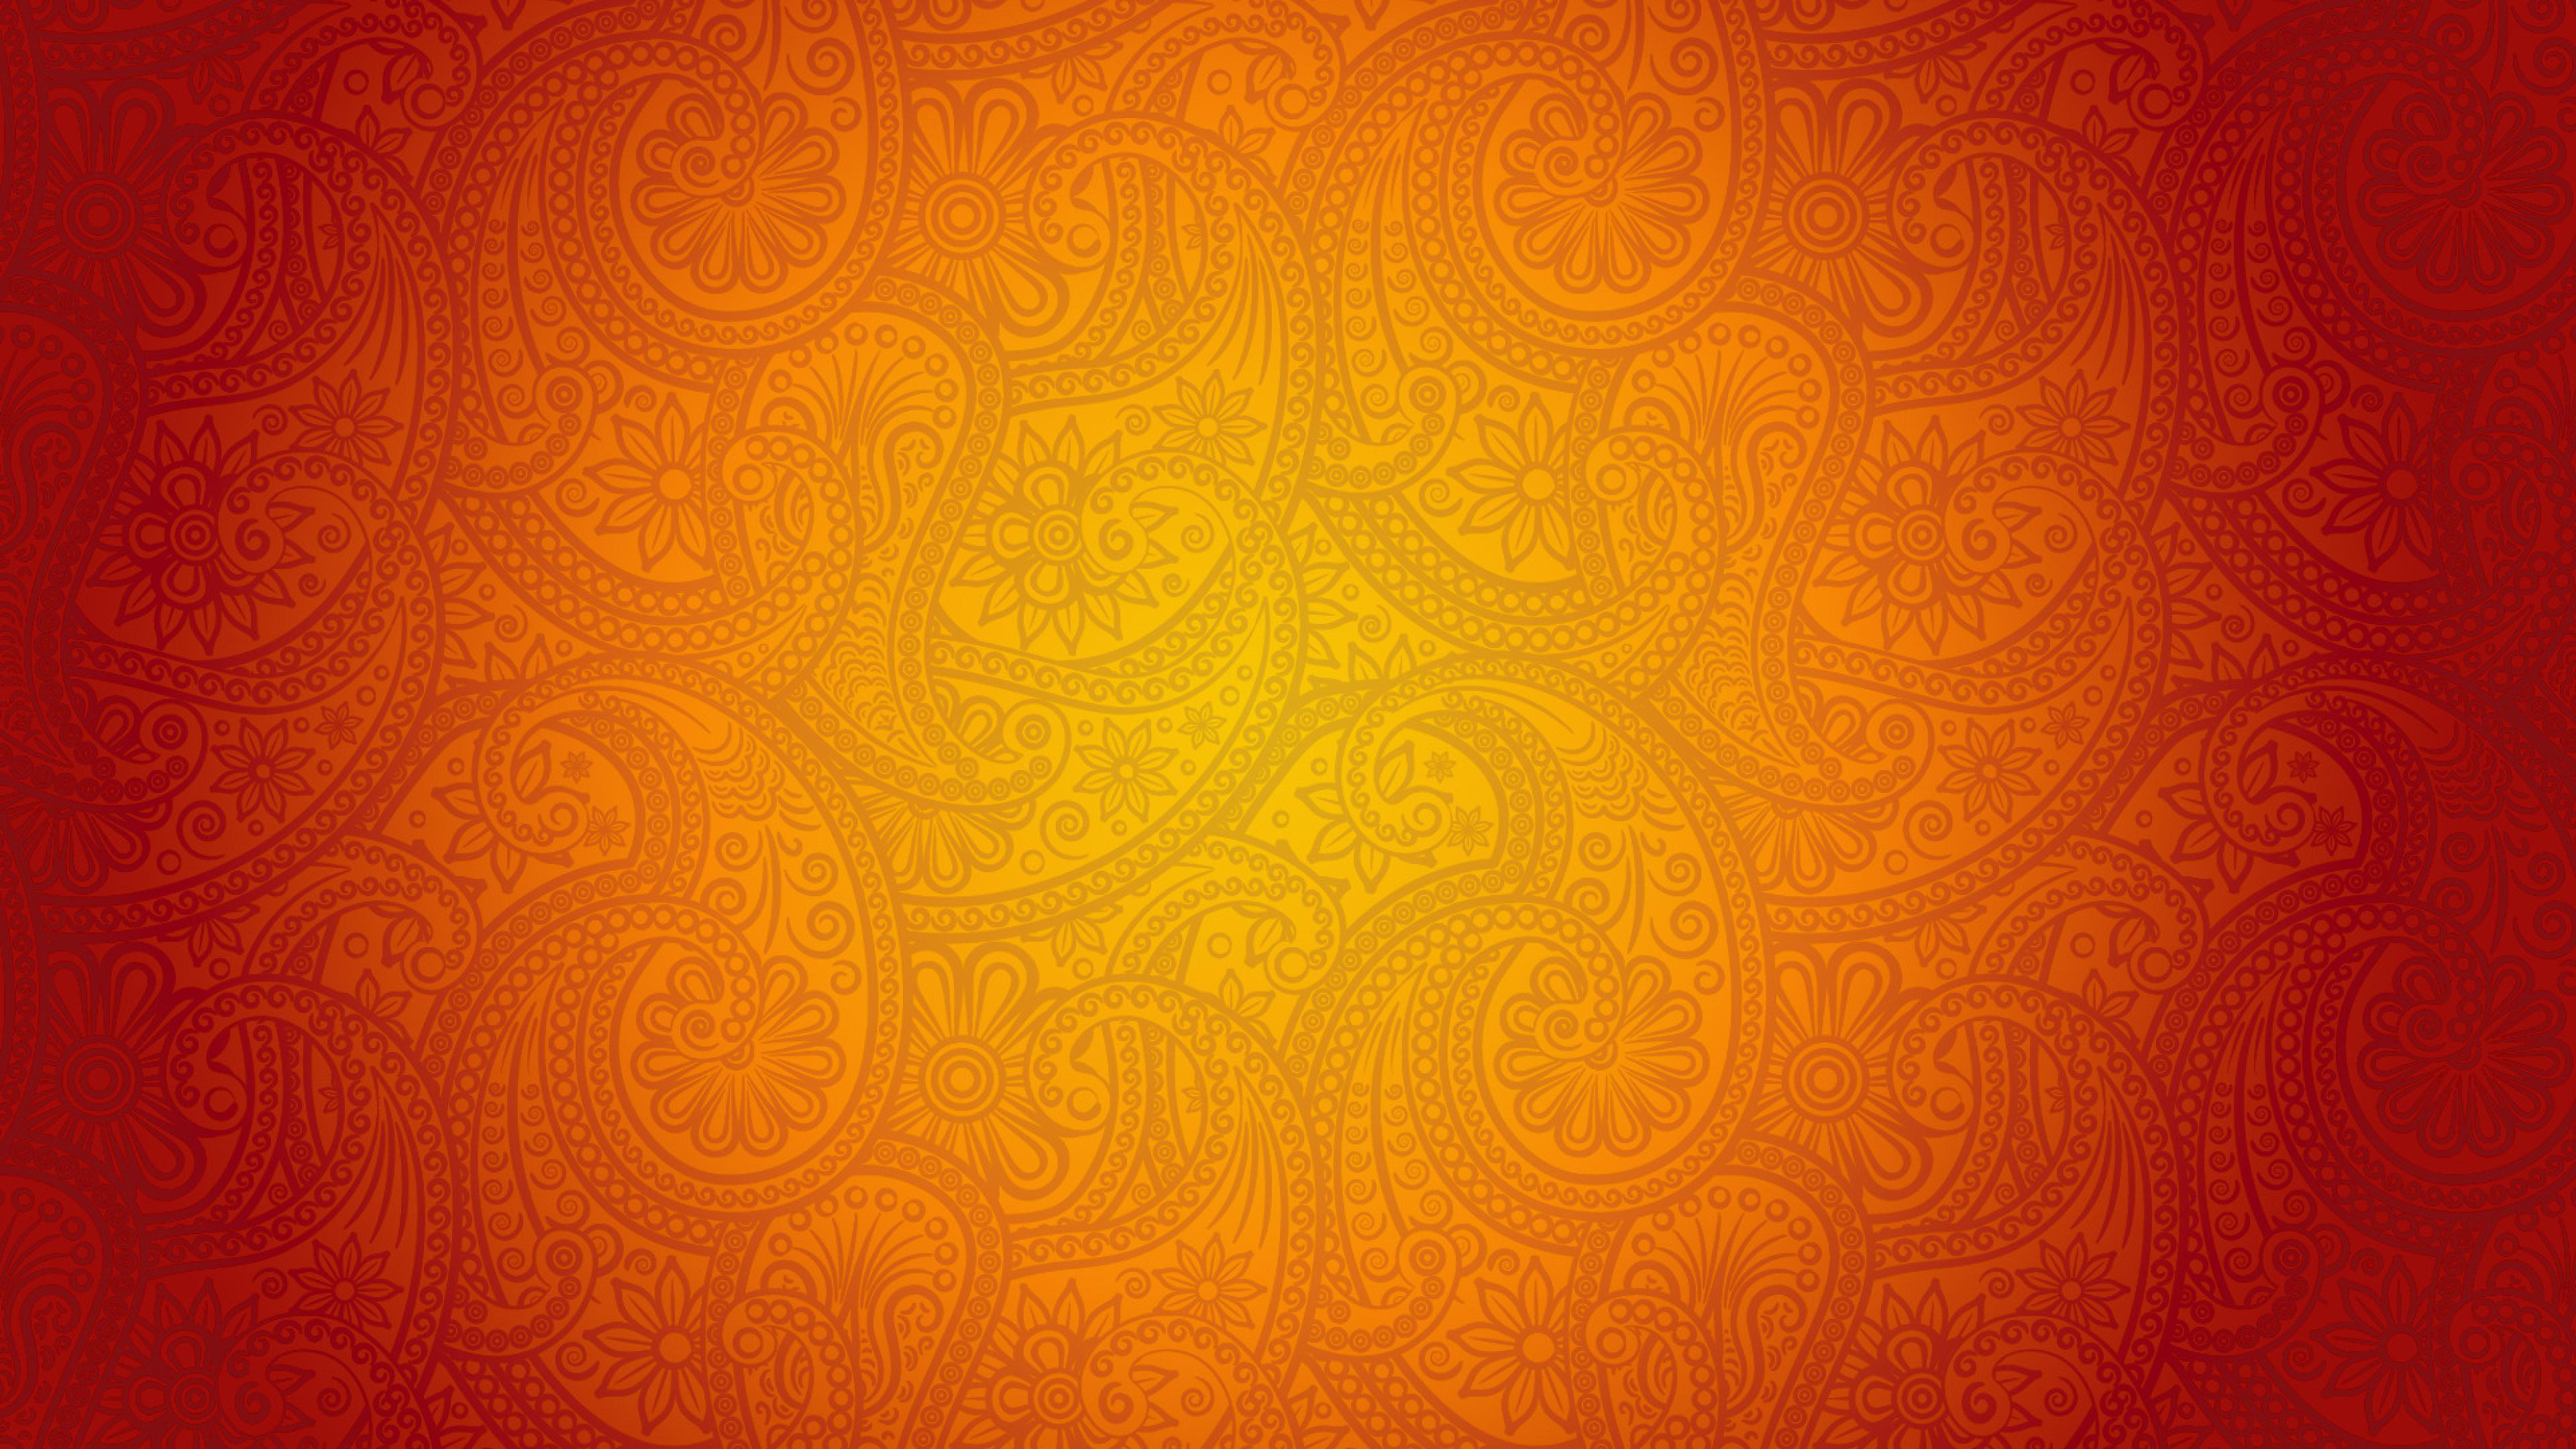 Orange Images And Wallpapers For Mac, Pc Shunvmall - Orange Colour  Background Hd - 3840x2160 Wallpaper 